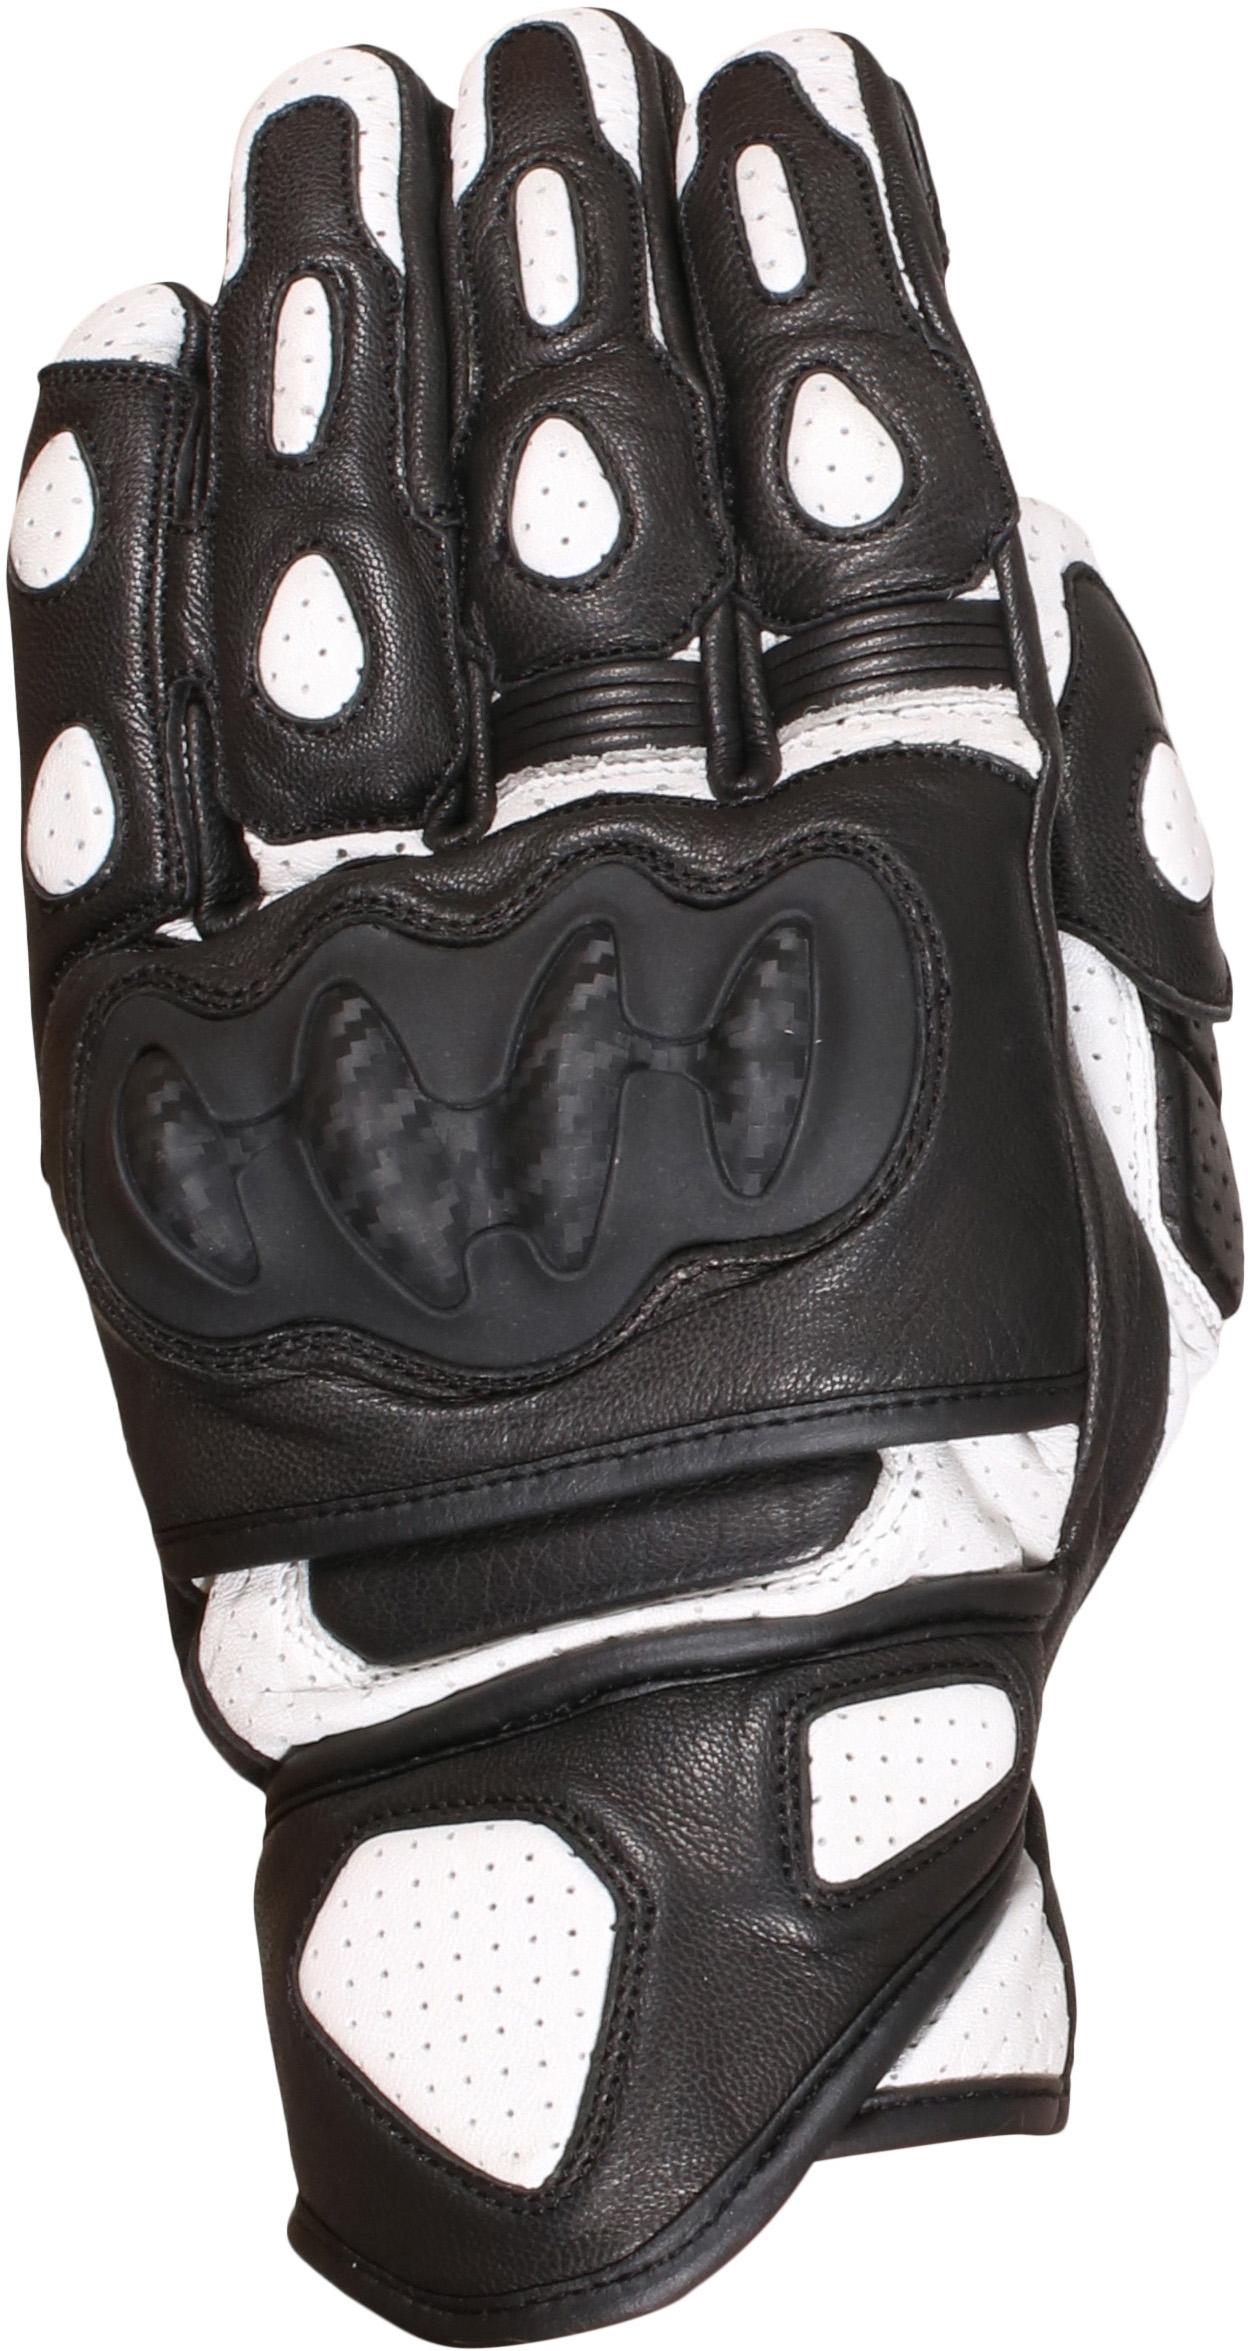 Weise Apex Motorcycle Gloves - Black/White, S